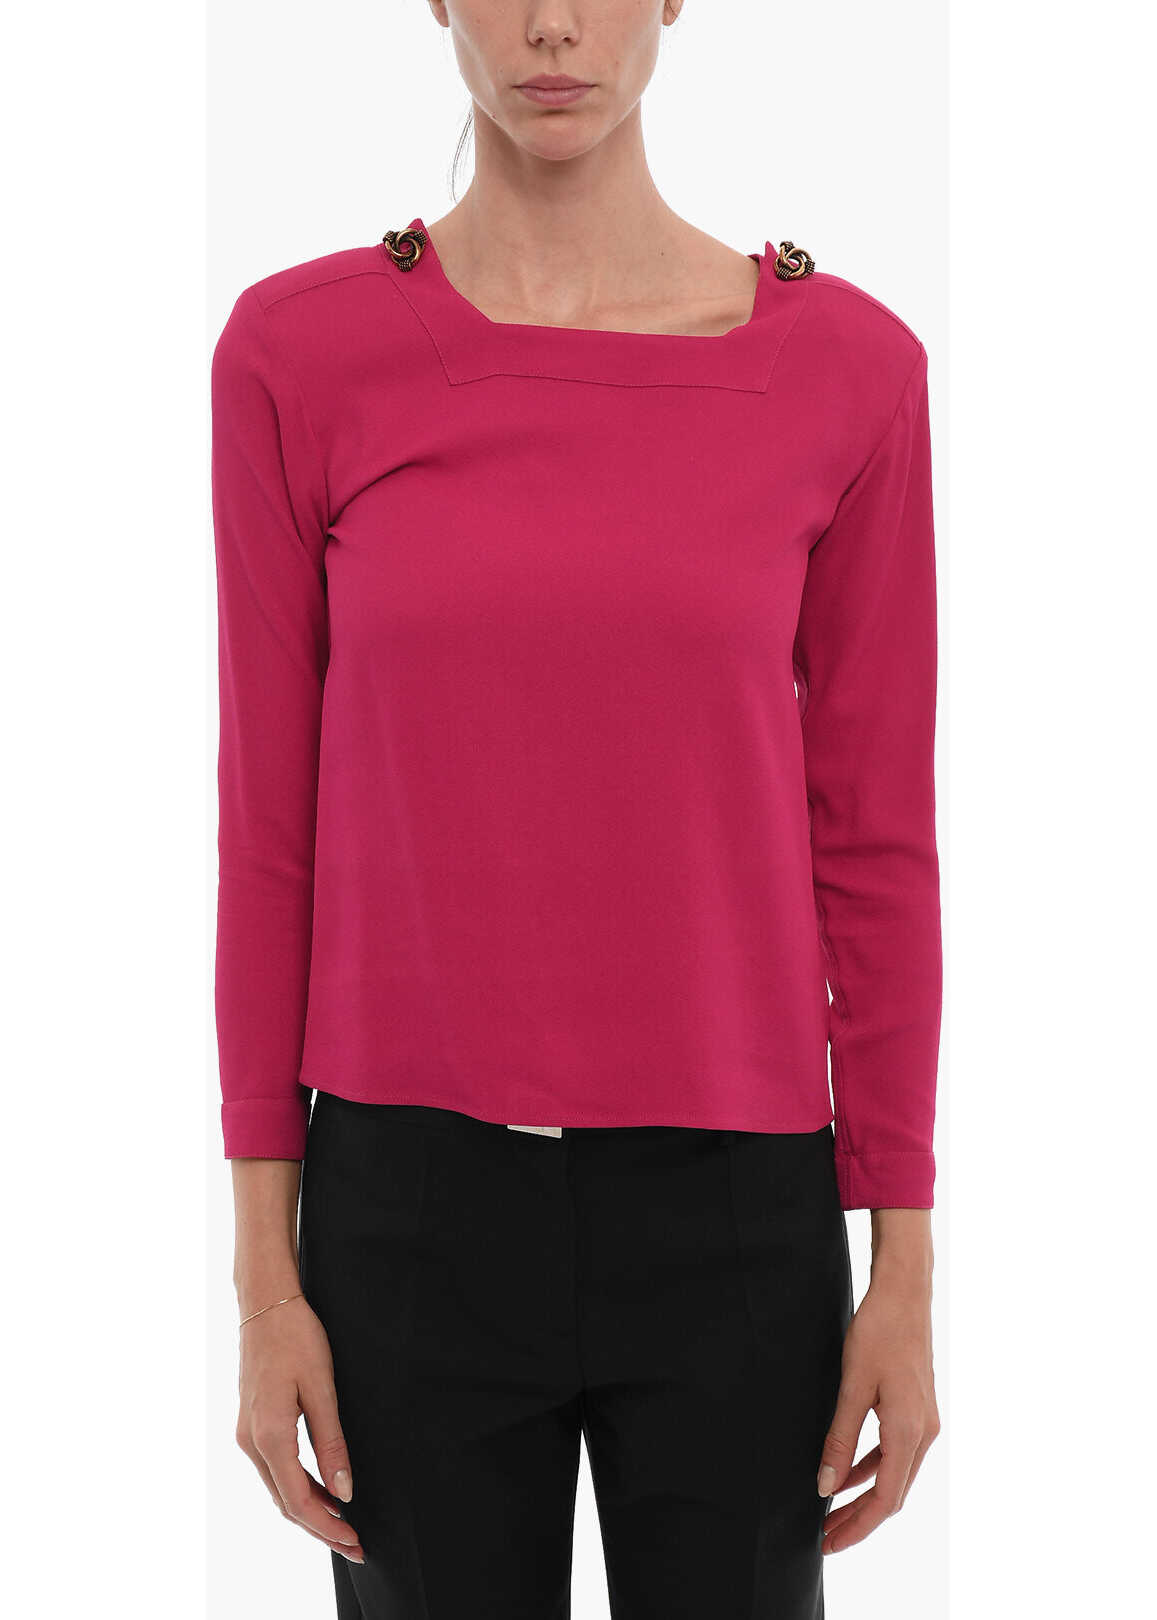 Saint Laurent Long Sleeved Blouse With Squared Neck And Jewel Buttons Pink